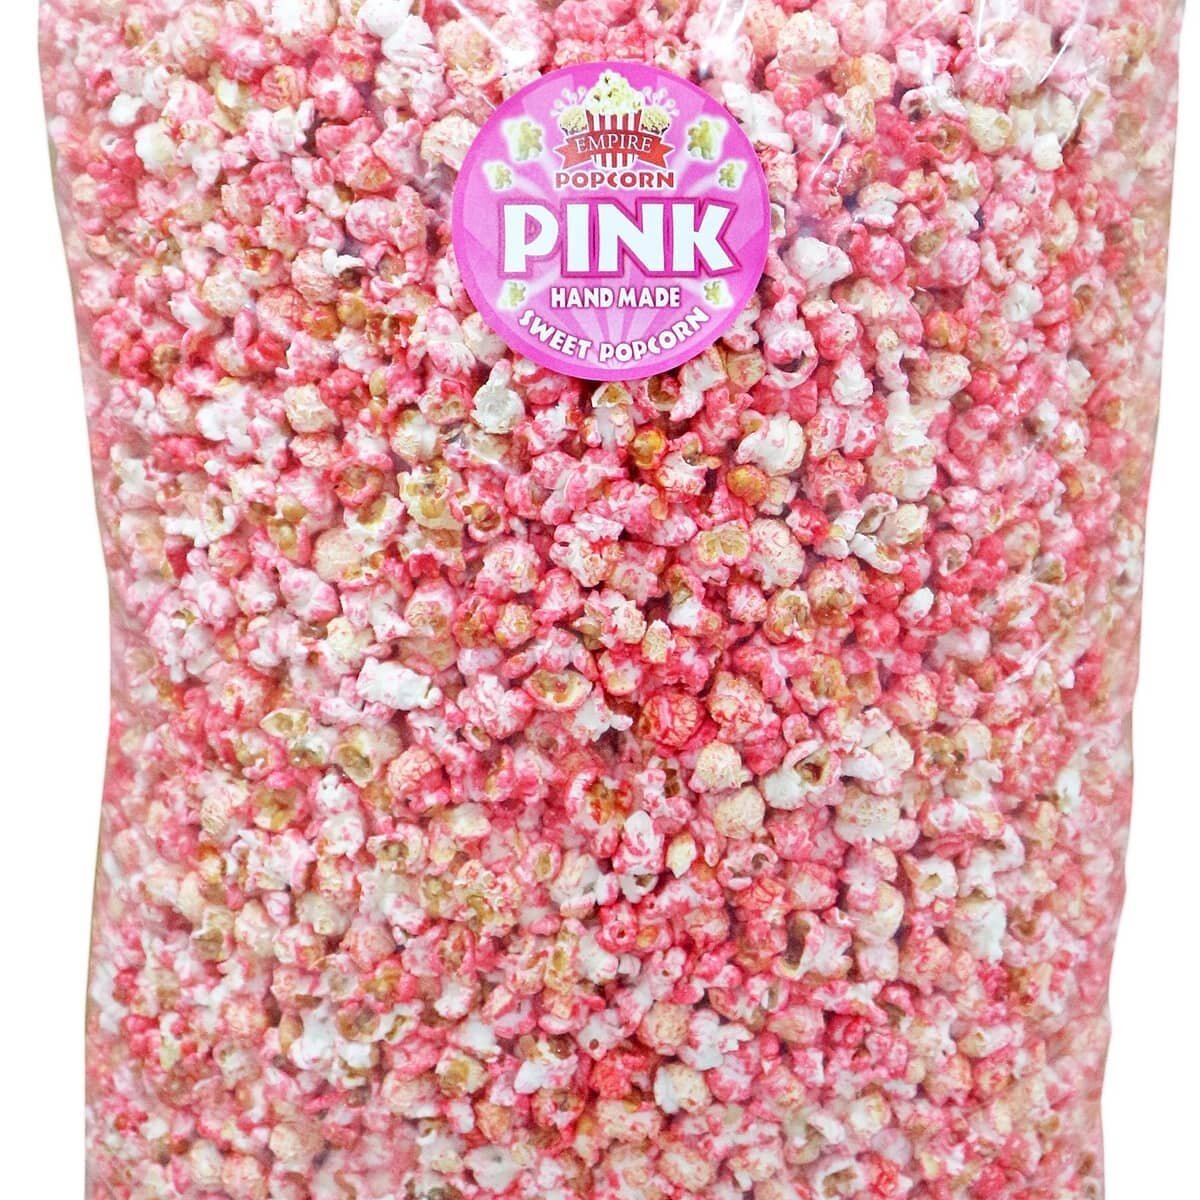 Fancy a trade bag of pink vanilla popcorn... &pound;22.99. Get in touch on 0161 335 0115 to secure yours. This bag is huge and will last you and your family for weeks. Normally supplied to cinemas in this quantity. #popcorn #lockdown #ukcinema #uk #1